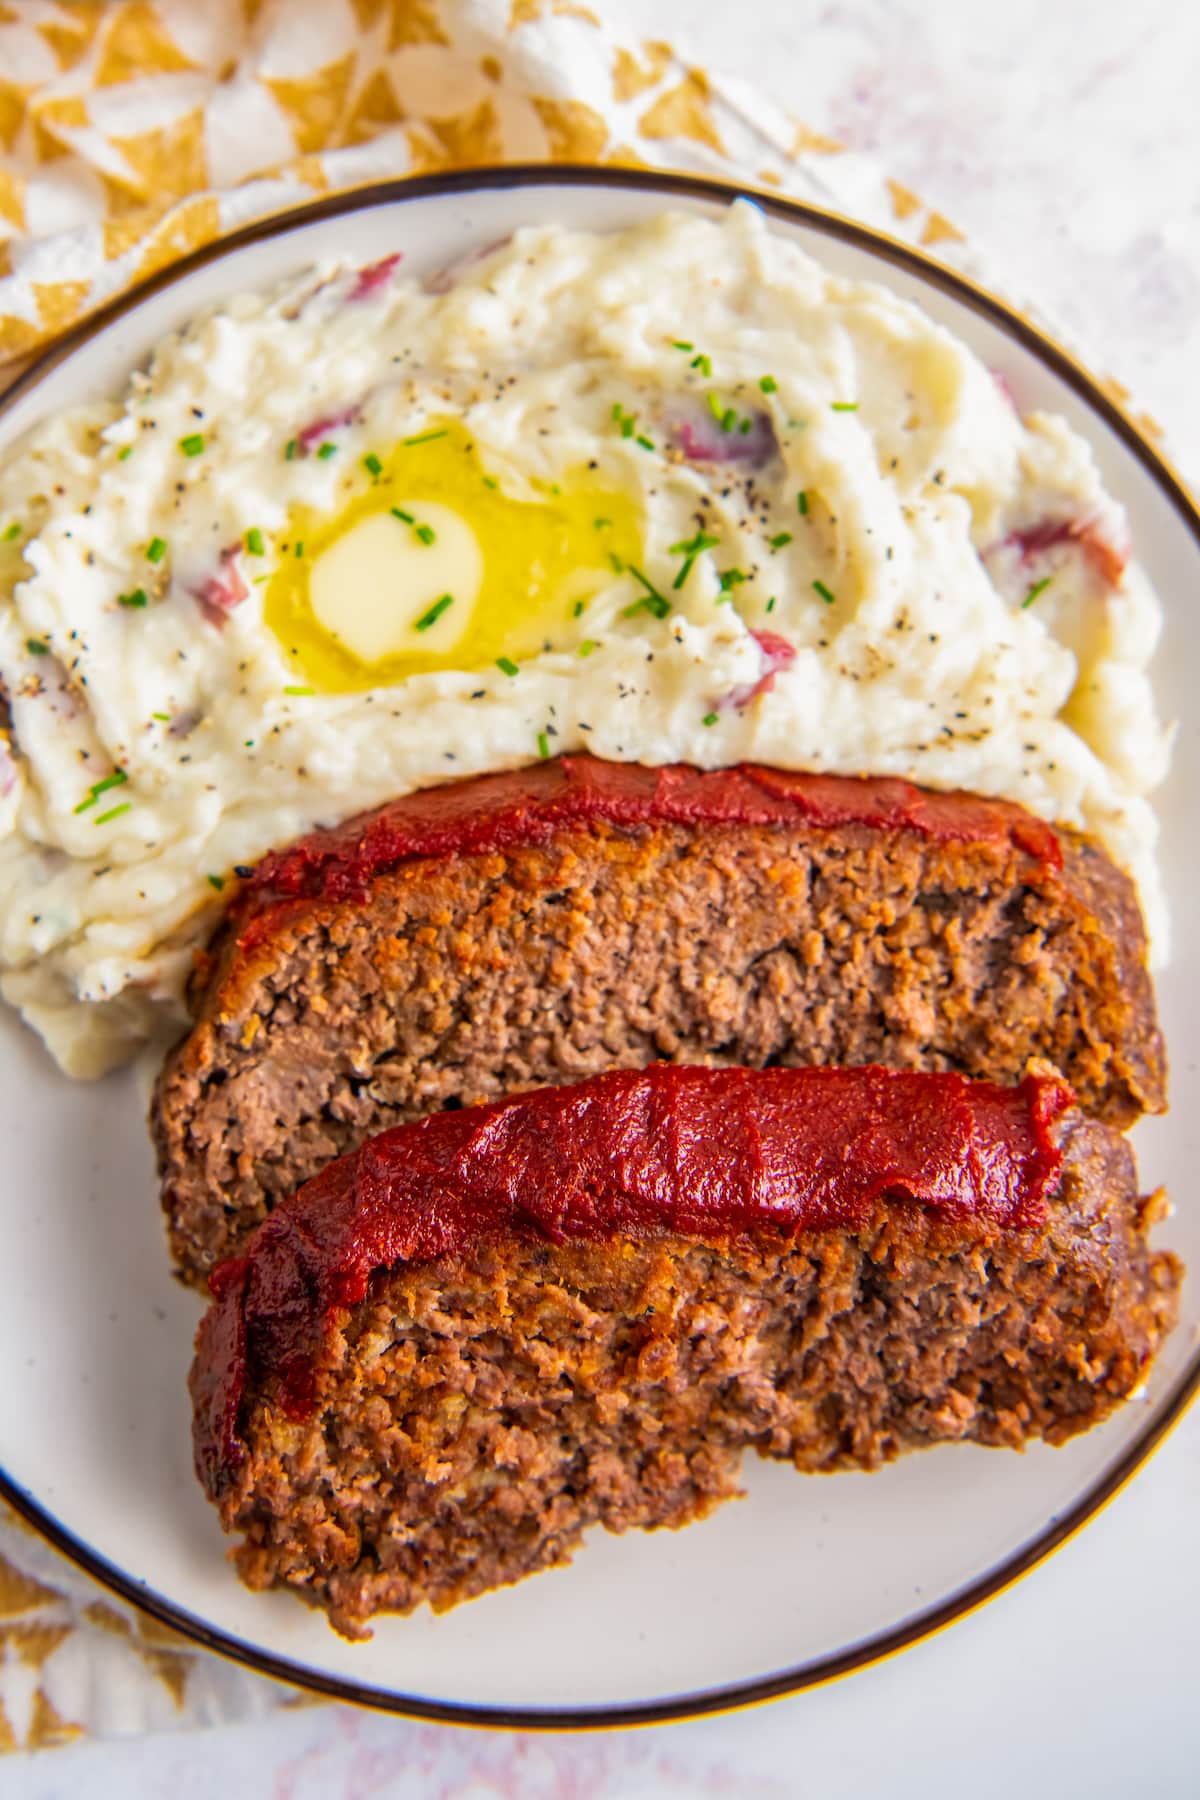 Slices of easy meatloaf and mashed potatoes.